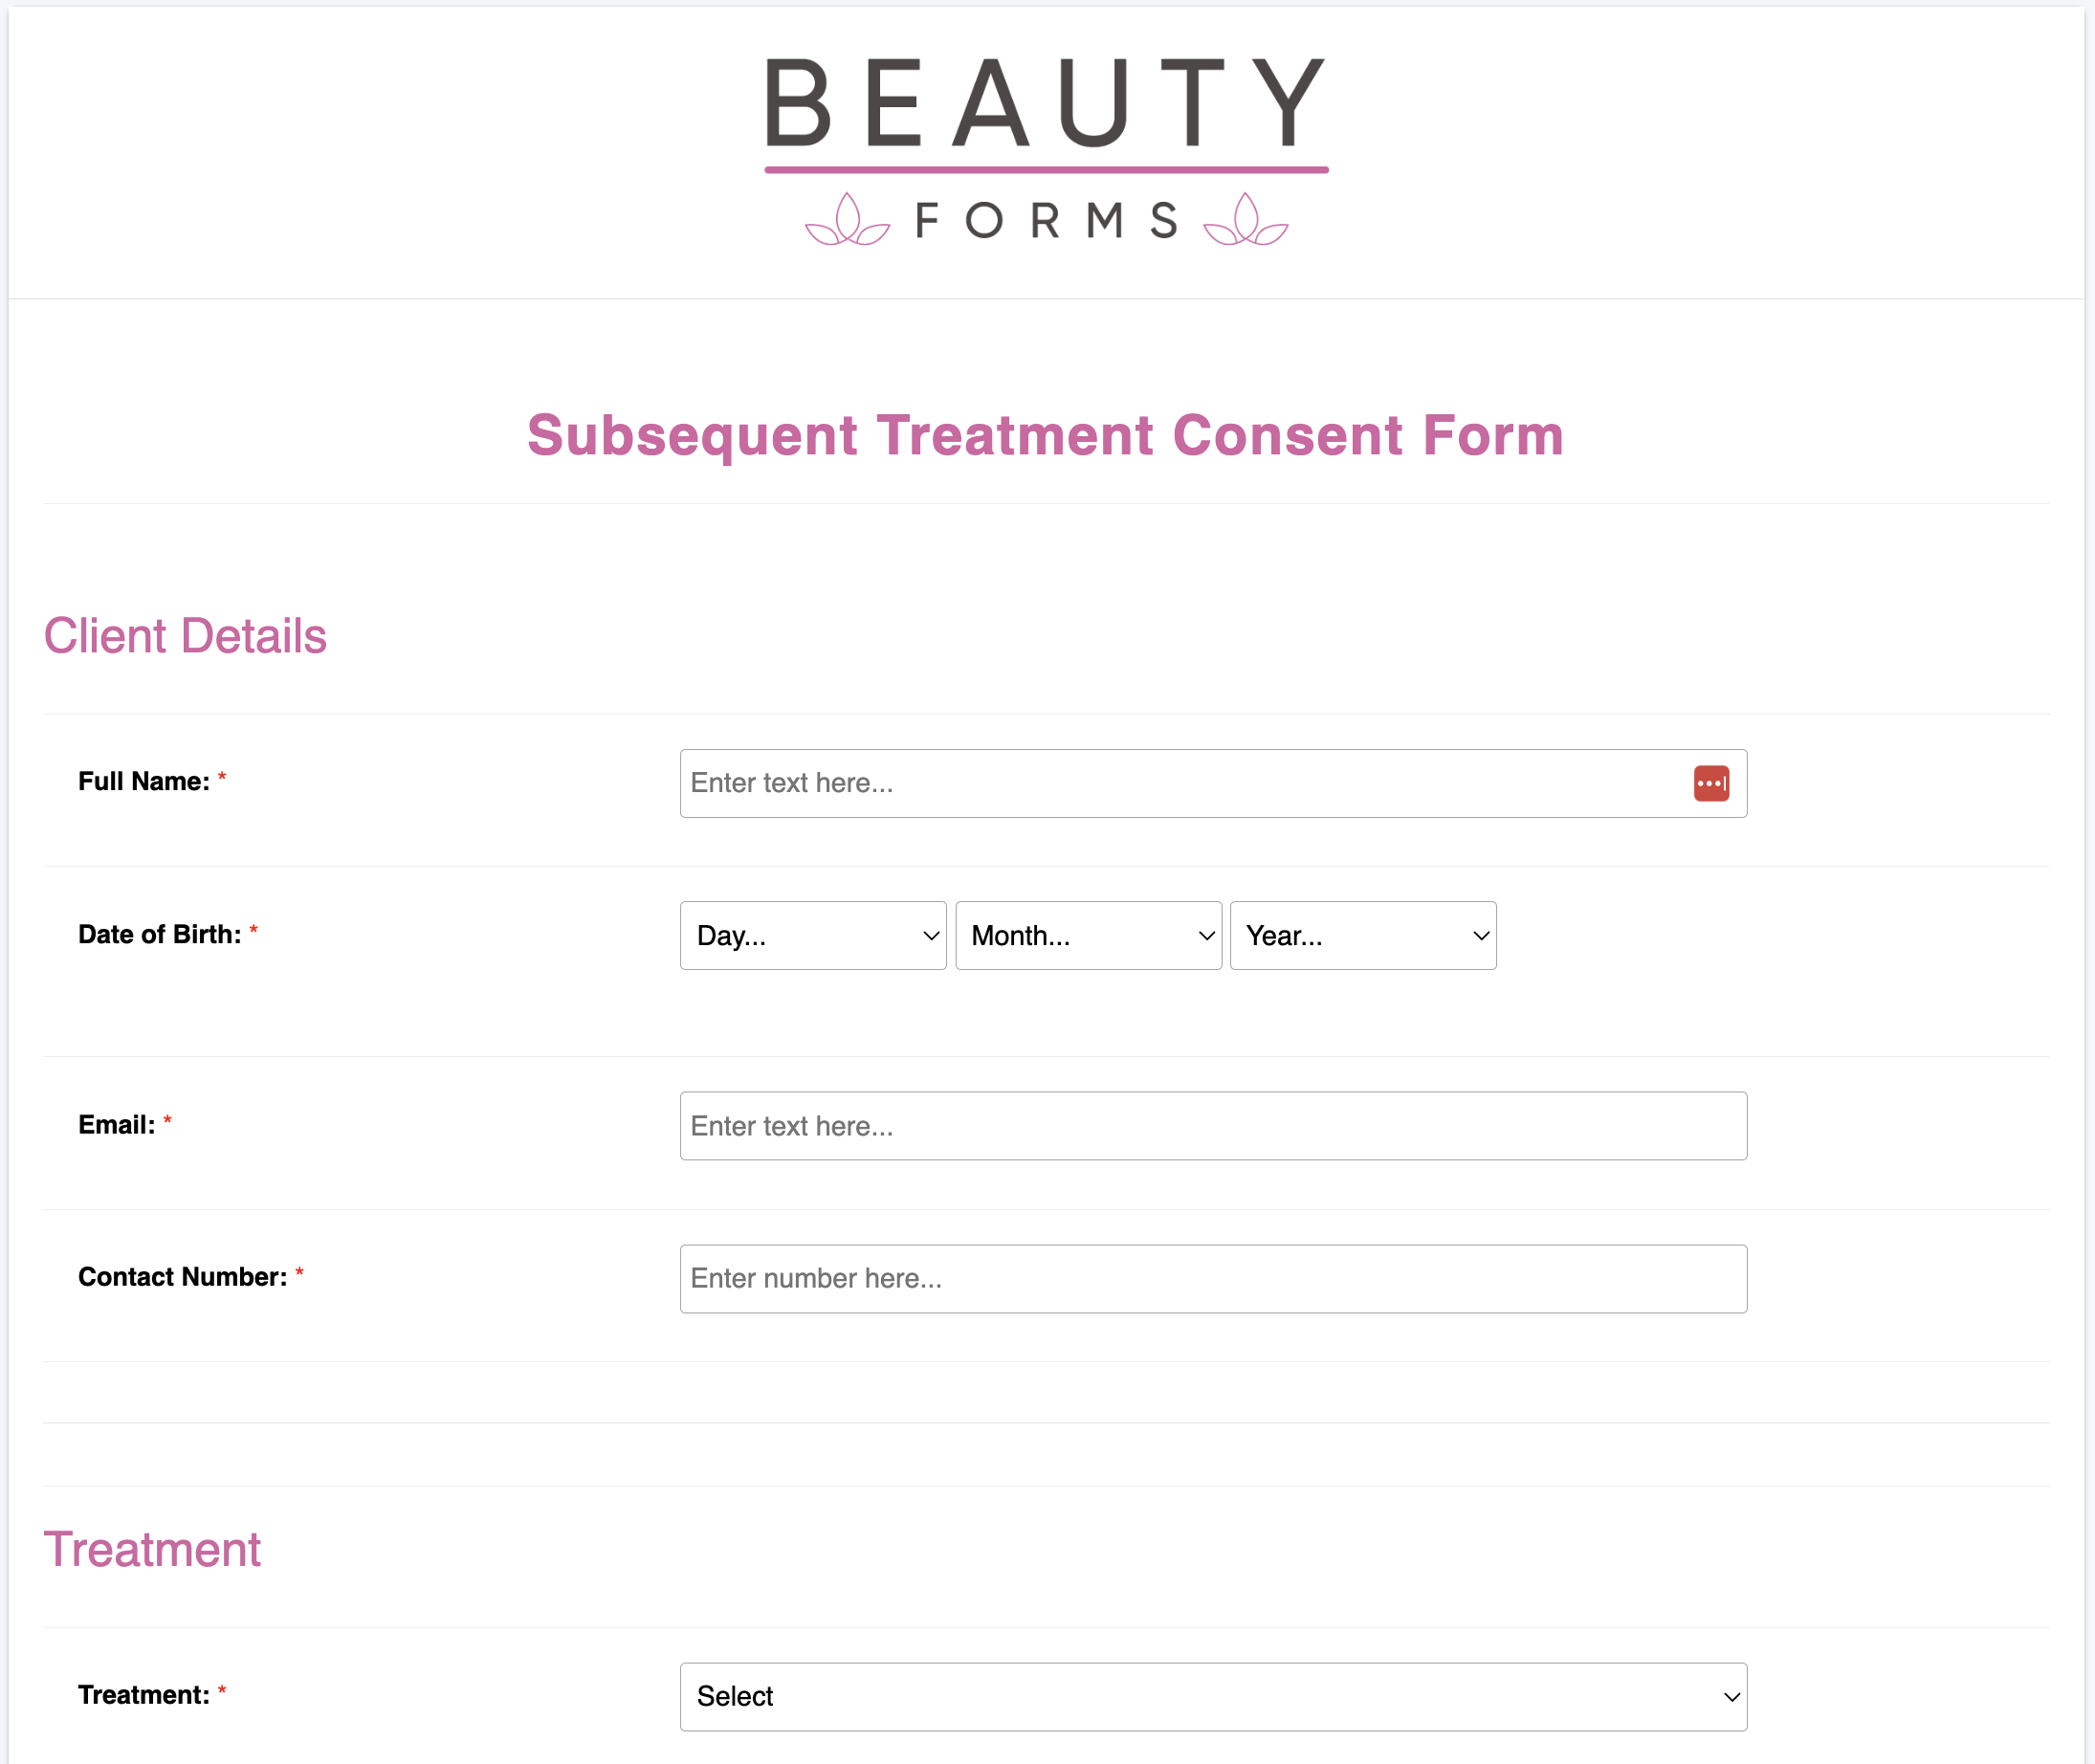 Subsequent Treatment Consent Form